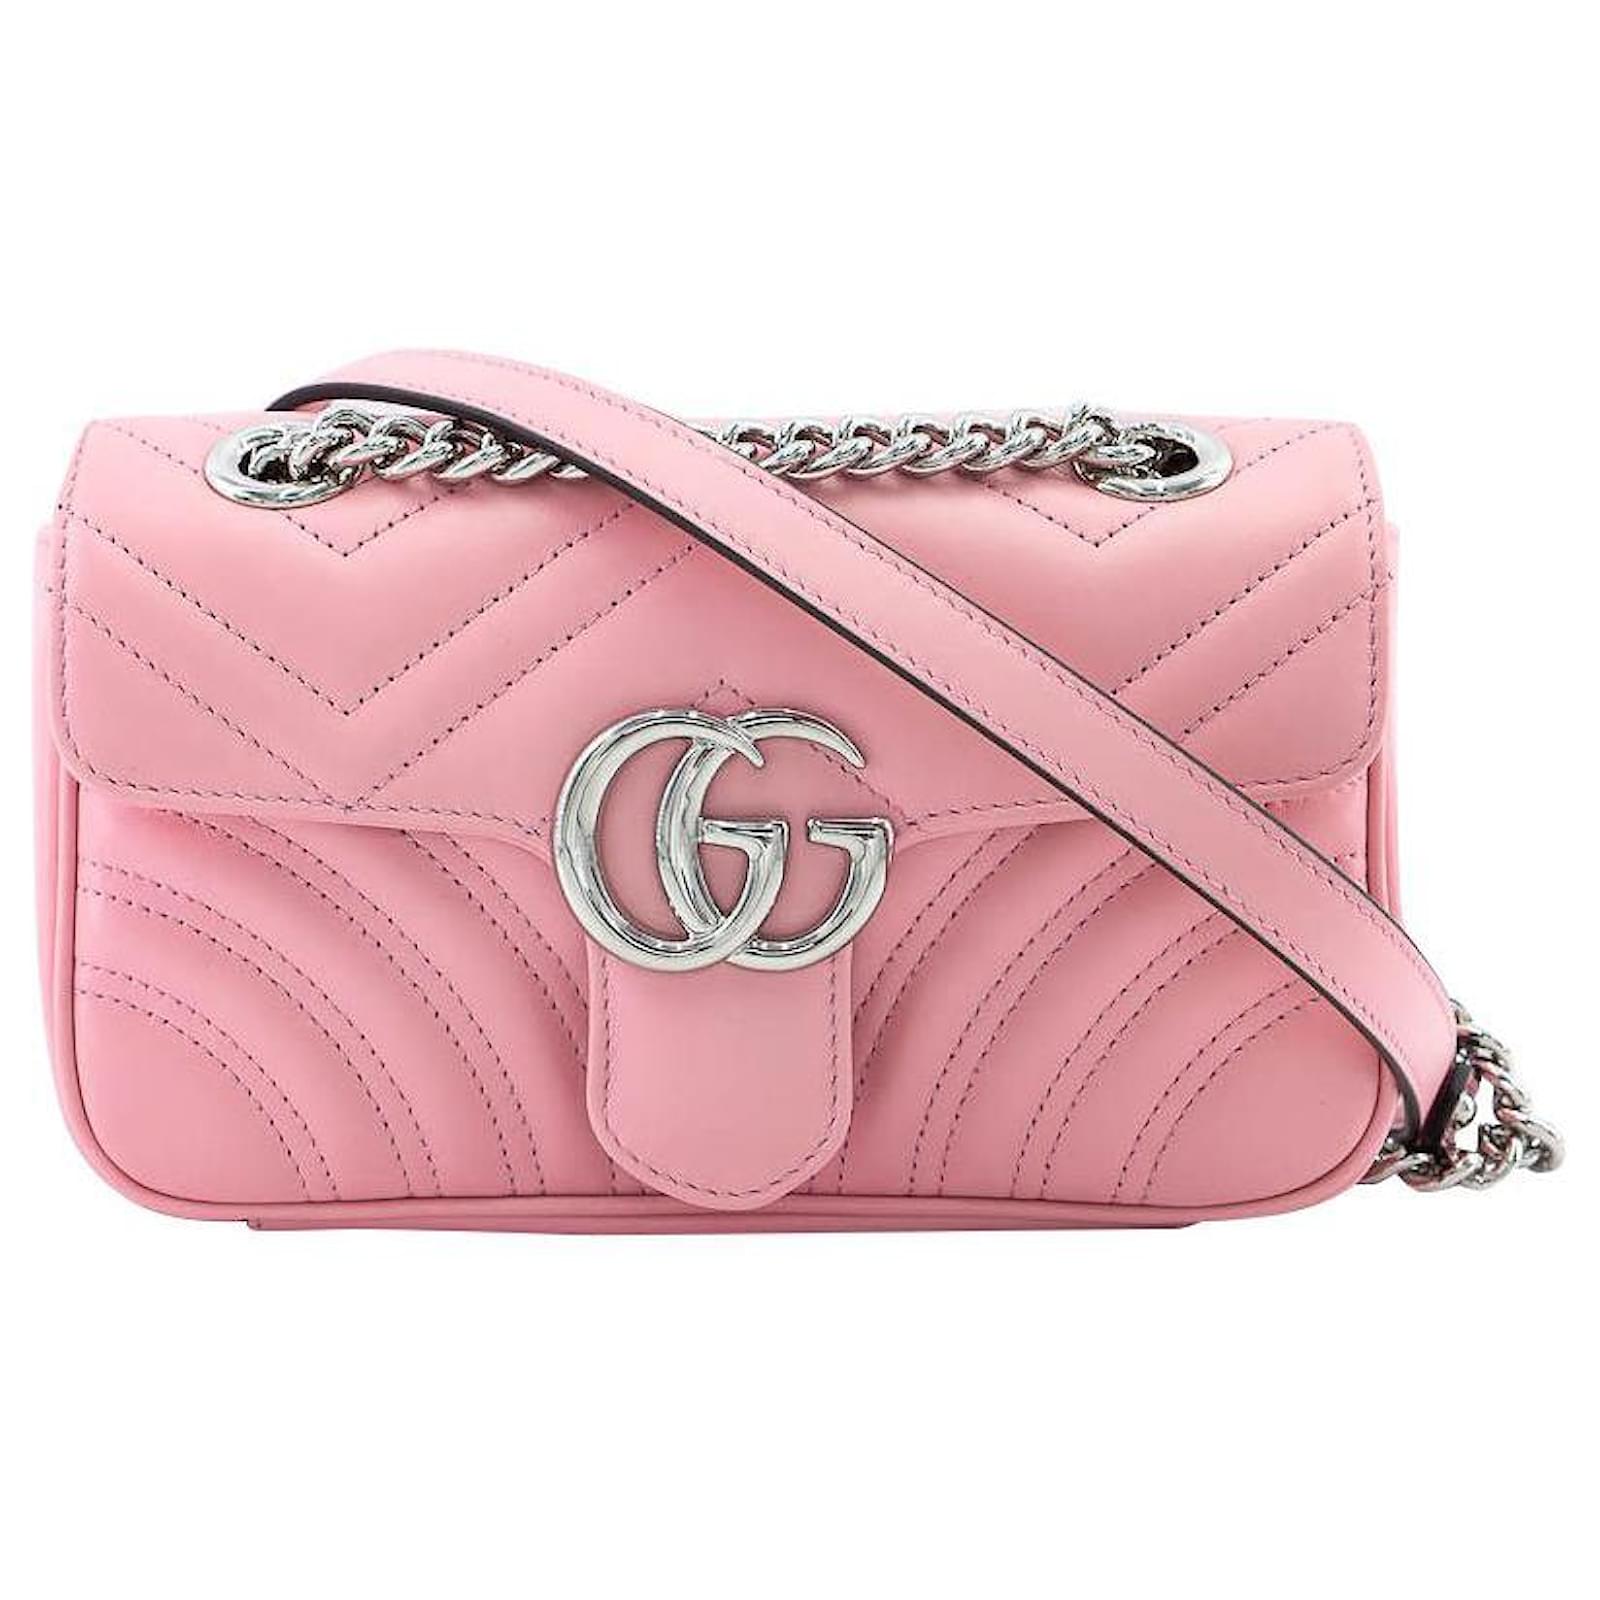 Gucci GG Marmont Flap Mini Pastel pink bag with silver hardware Leather   - Joli Closet